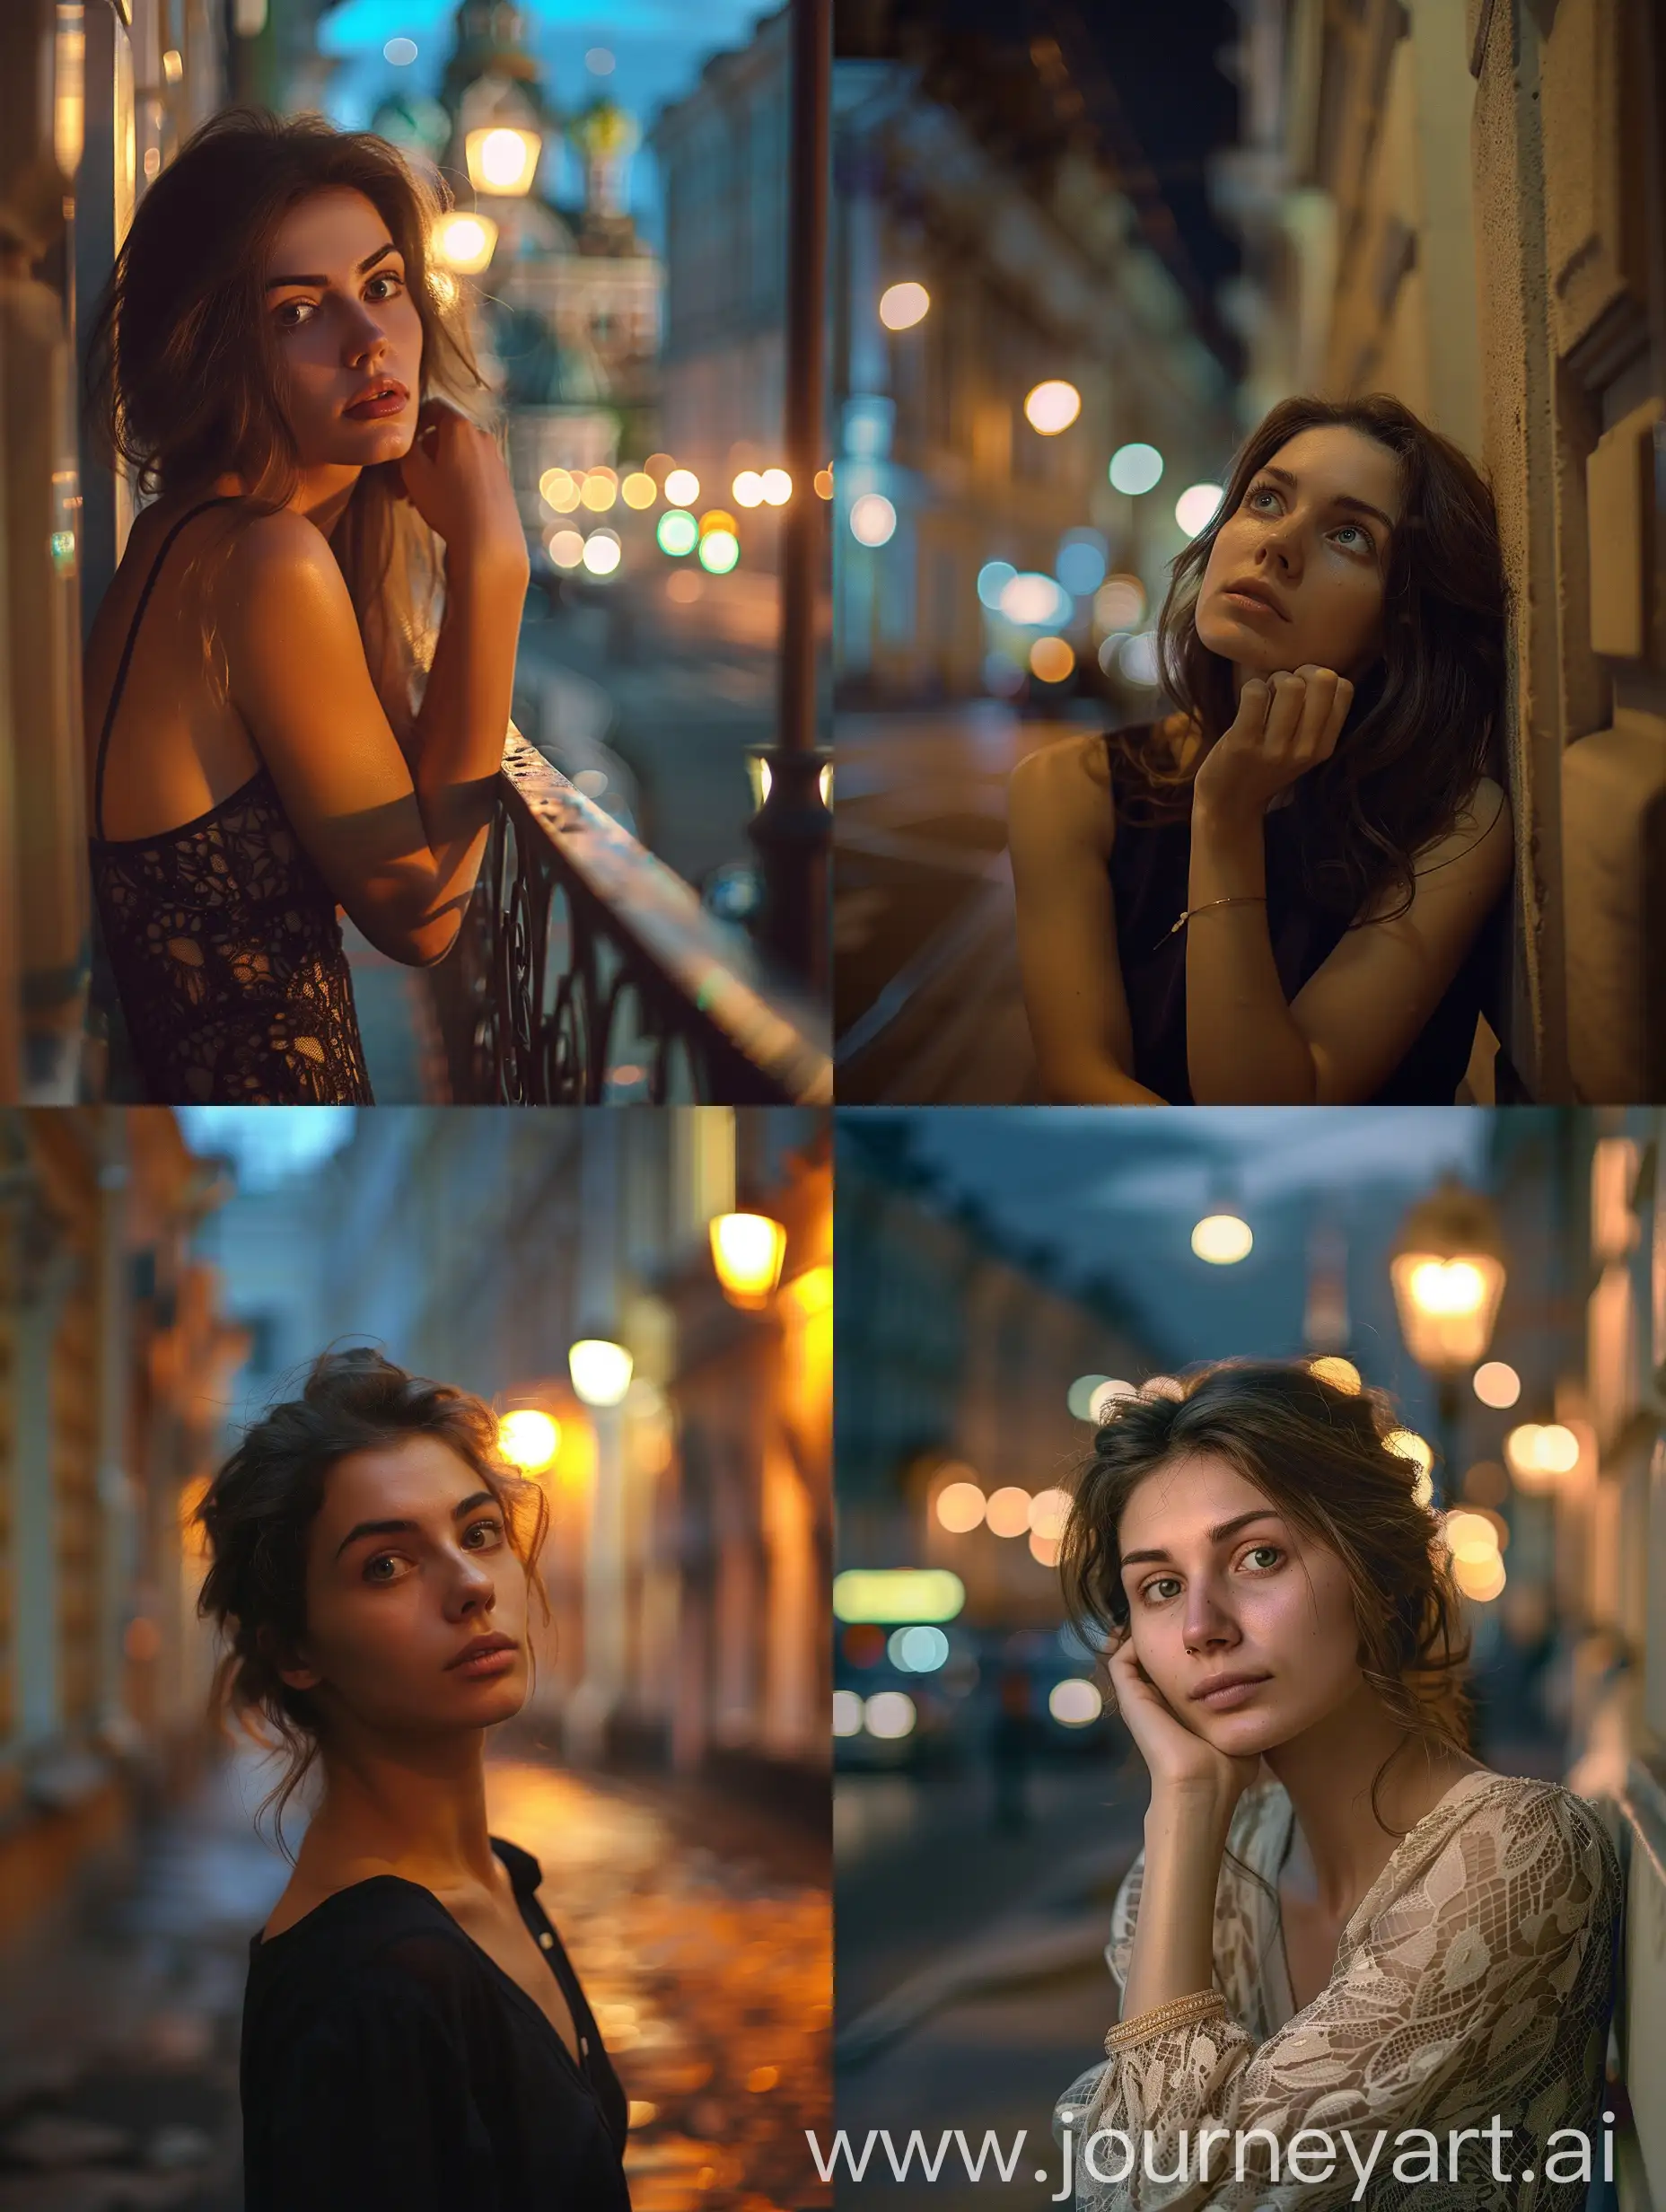 Pensive-40YearOld-Woman-Contemplating-on-Historic-St-Petersburg-Street-at-Night